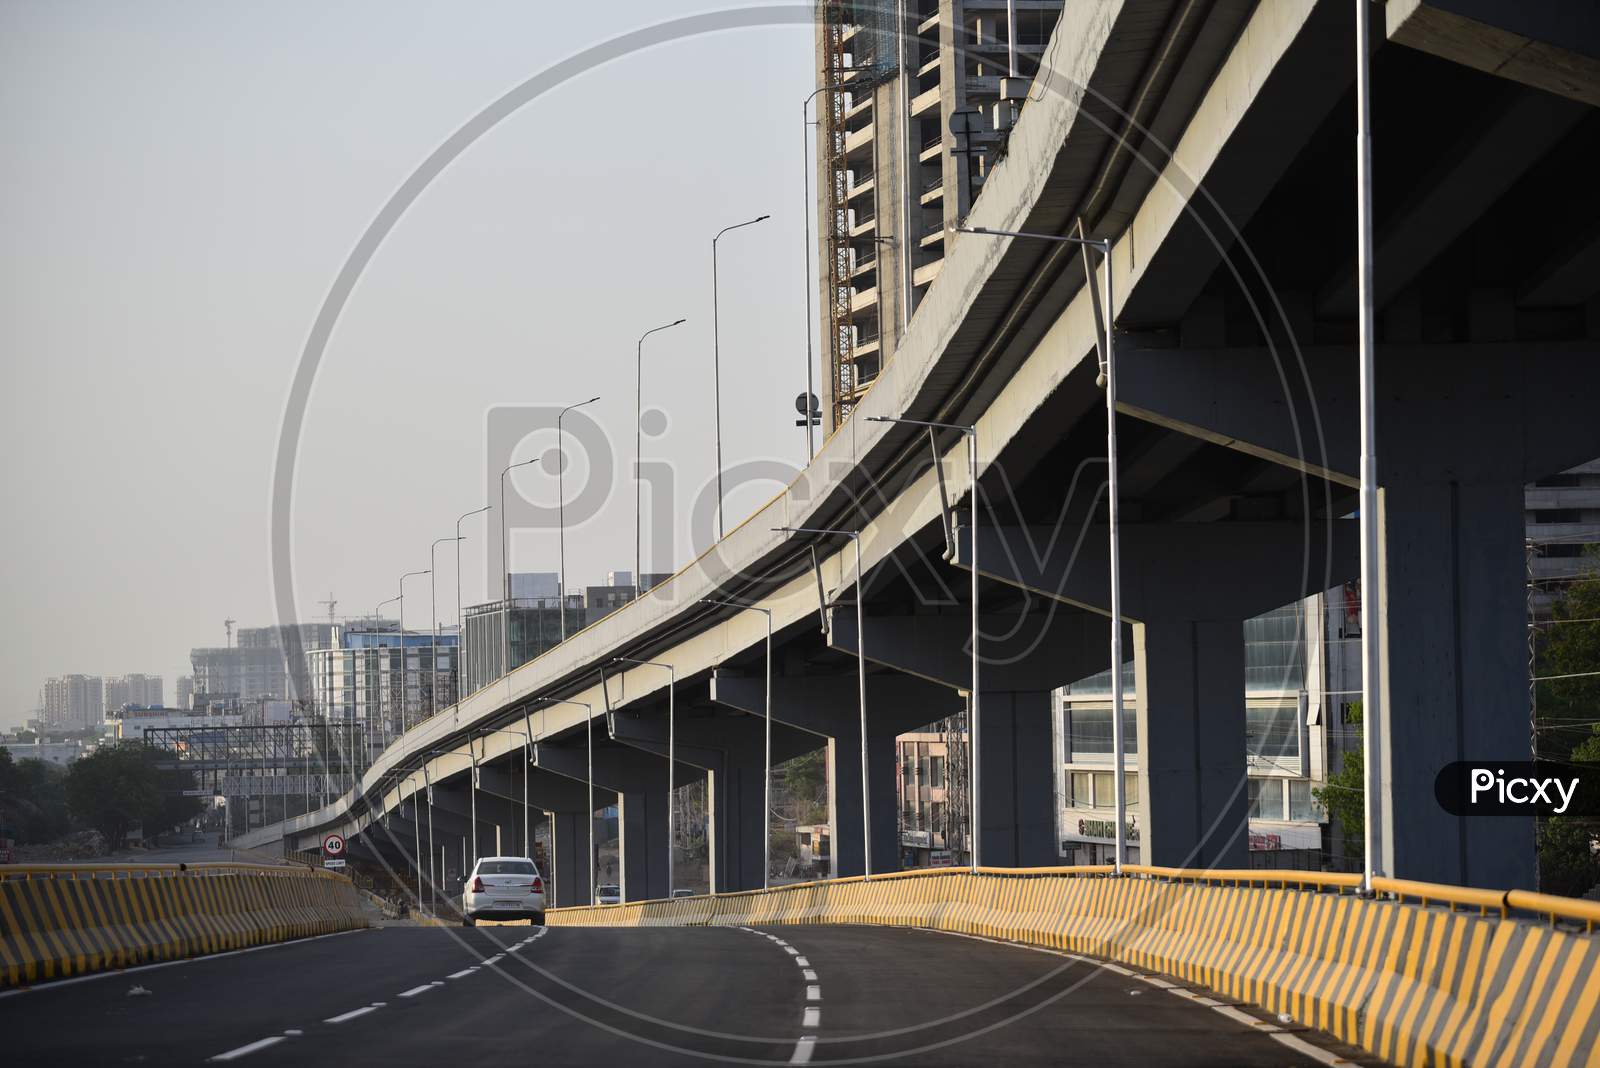 the new Bio Diversity Level 1 Flyover, a 690m flyover connecting Gachibowli with Raidurg opened to public from May 21, 2020. This will help in reducing the traffic congestion at the junction. Hyderabad May 22, 2020.